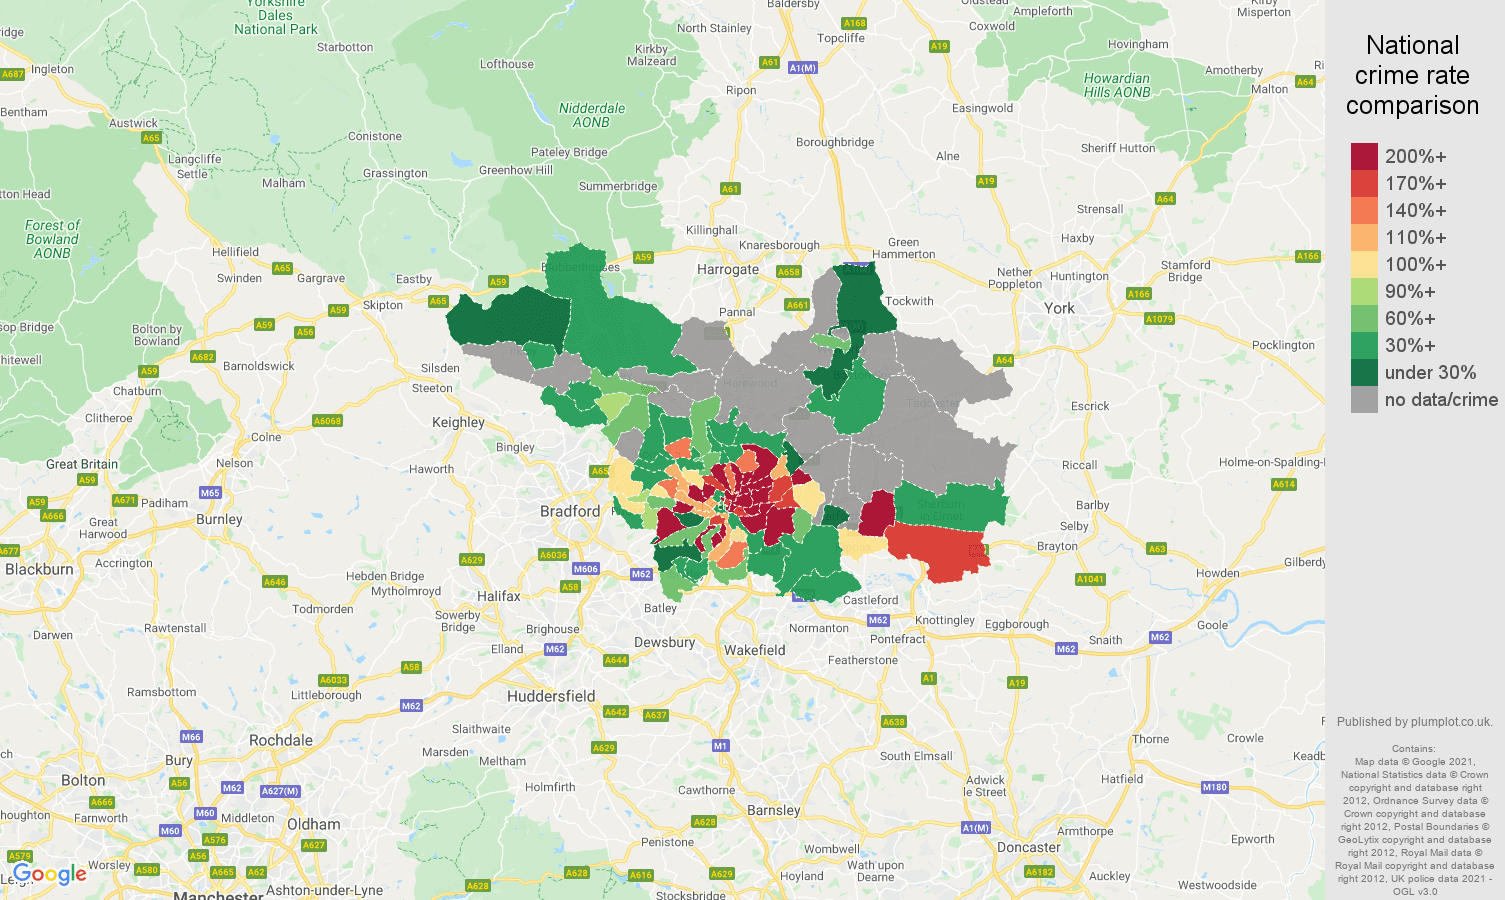 Leeds robbery crime rate comparison map